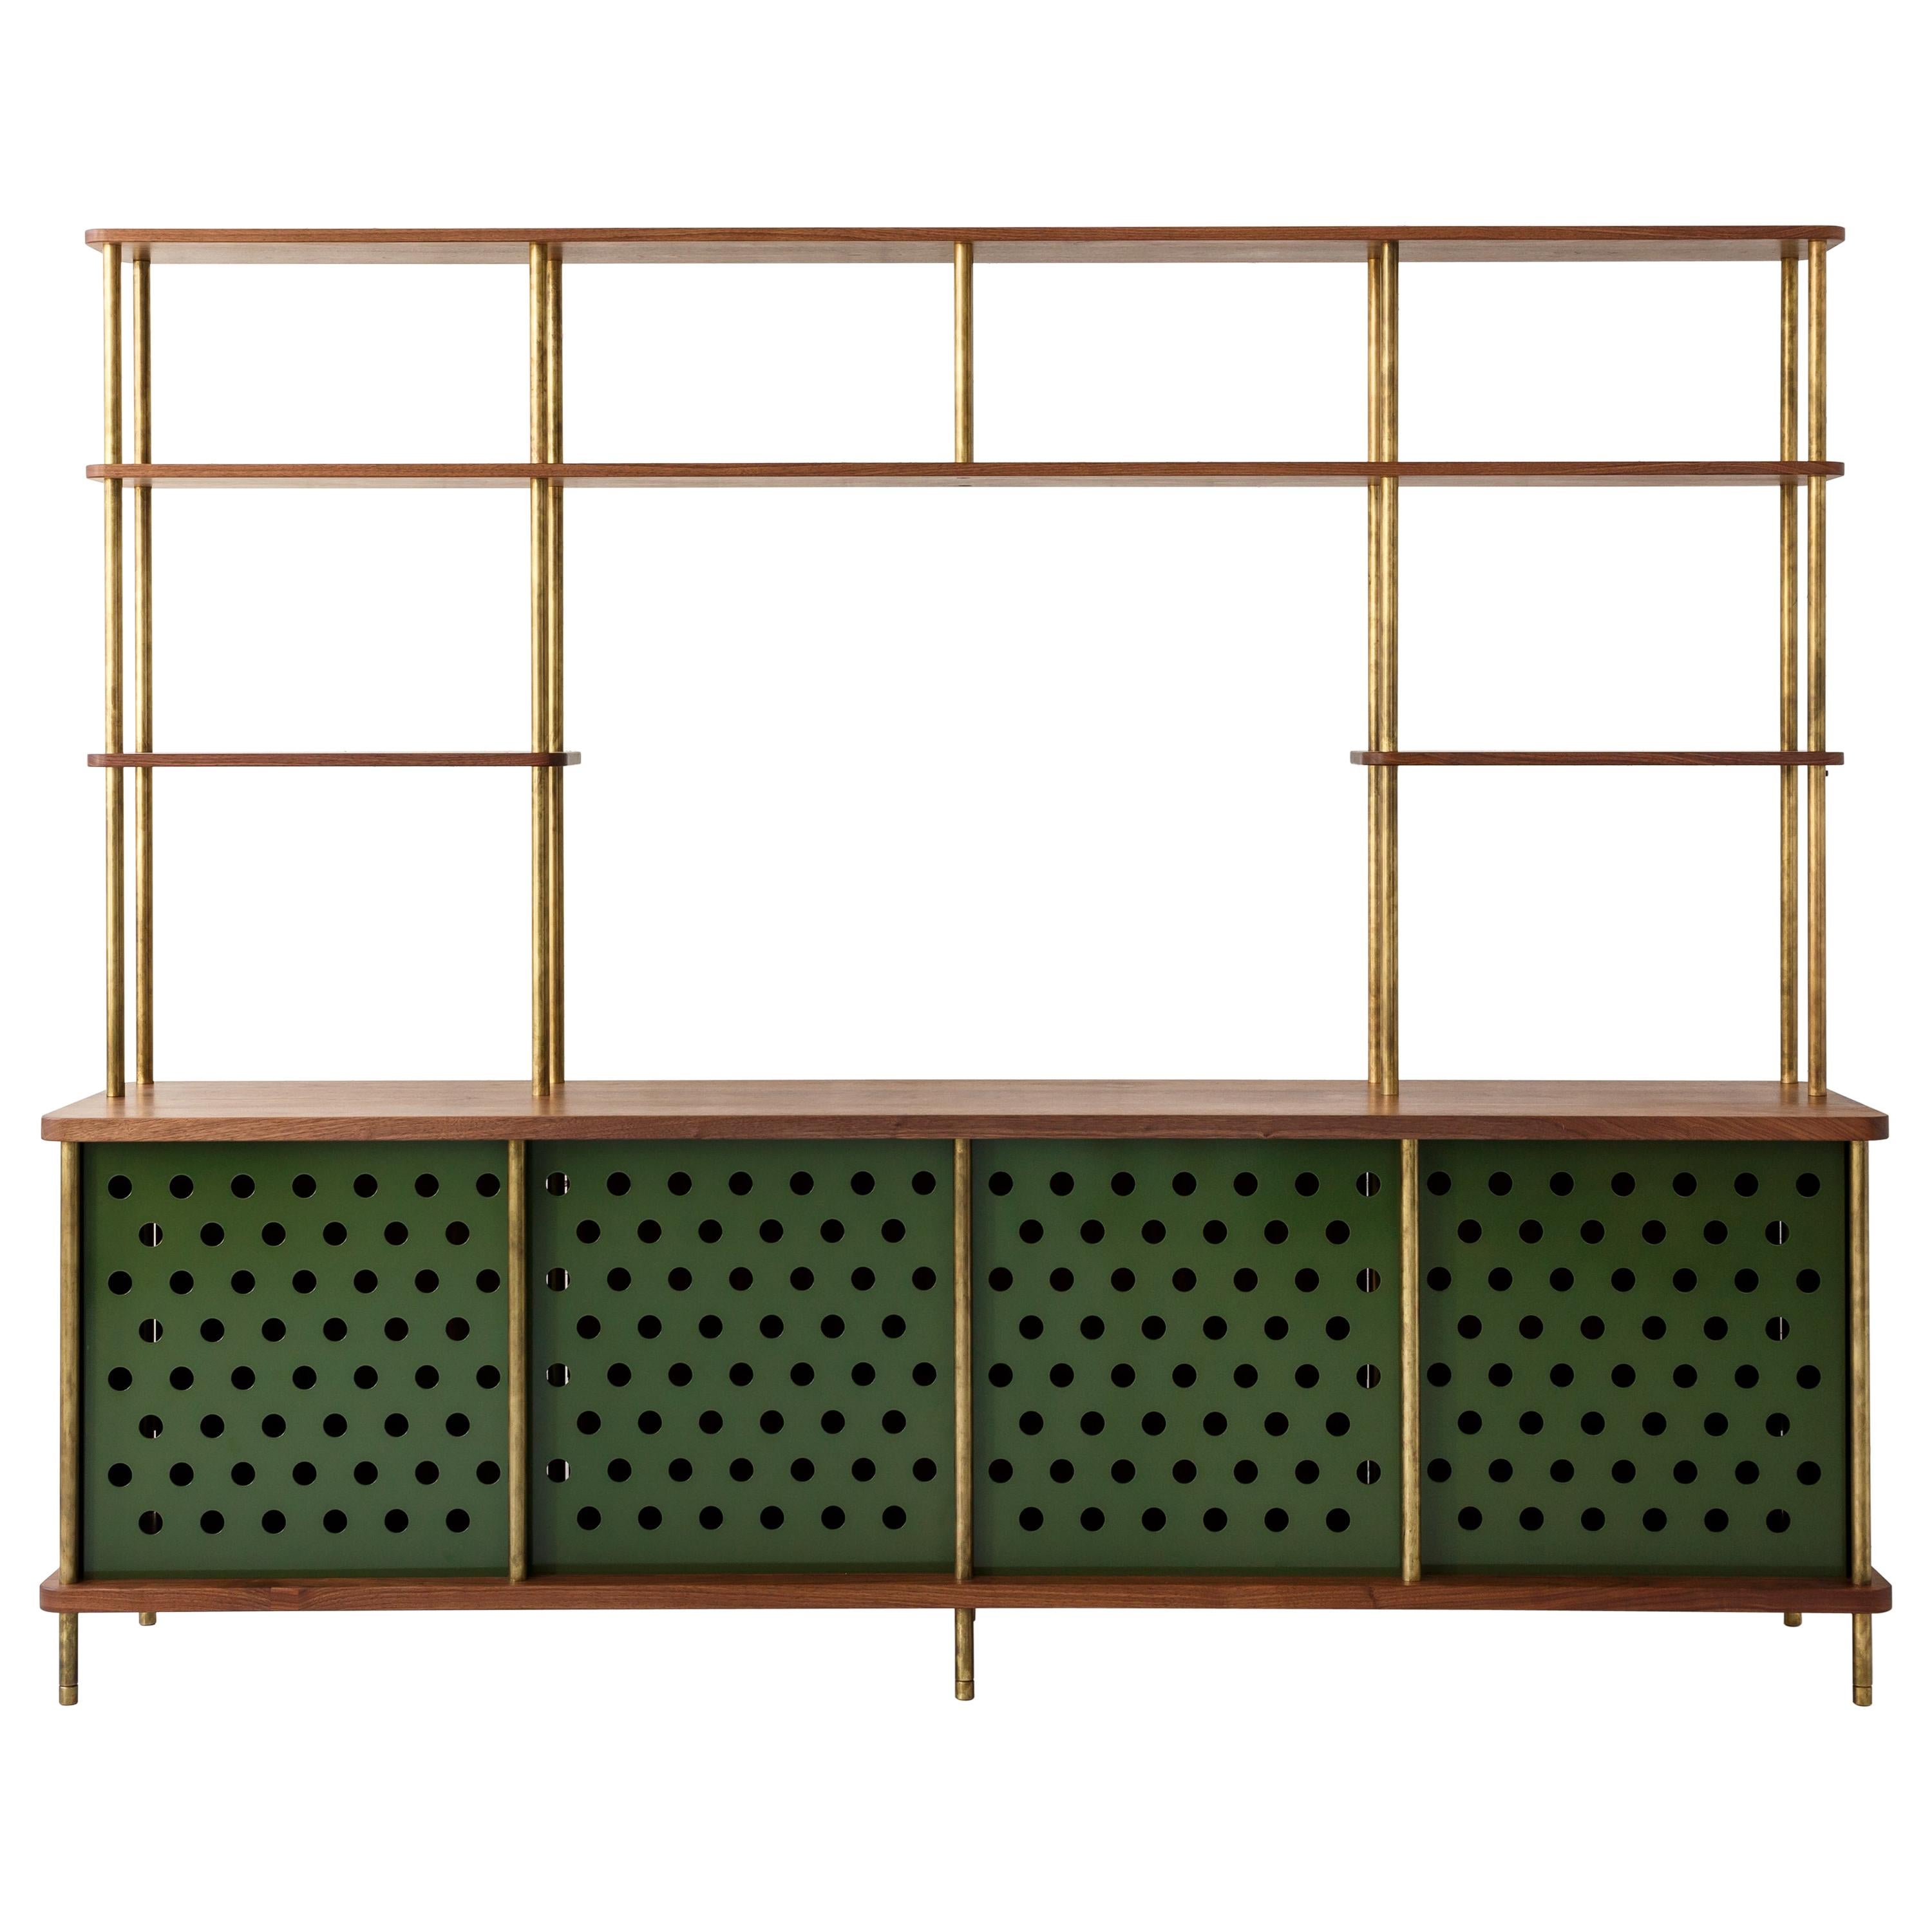 Contemporary 4 Door Strata Credenza in Walnut Wood and Brass by Fort Standard